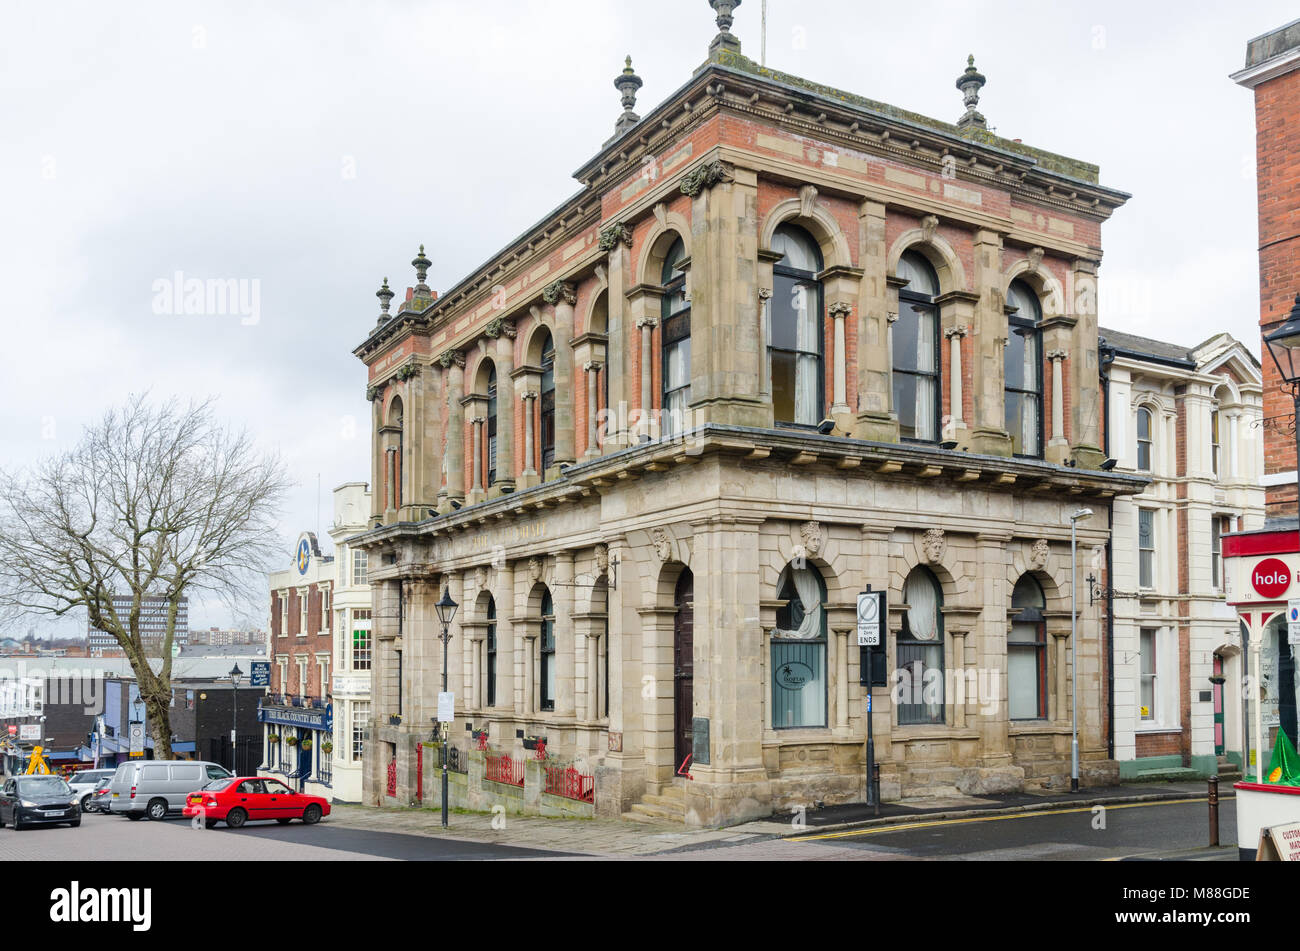 The Guildhall in High Street, Walsall which was previously Walsall Magistrates Court is Grade 2 listed building. Stock Photo